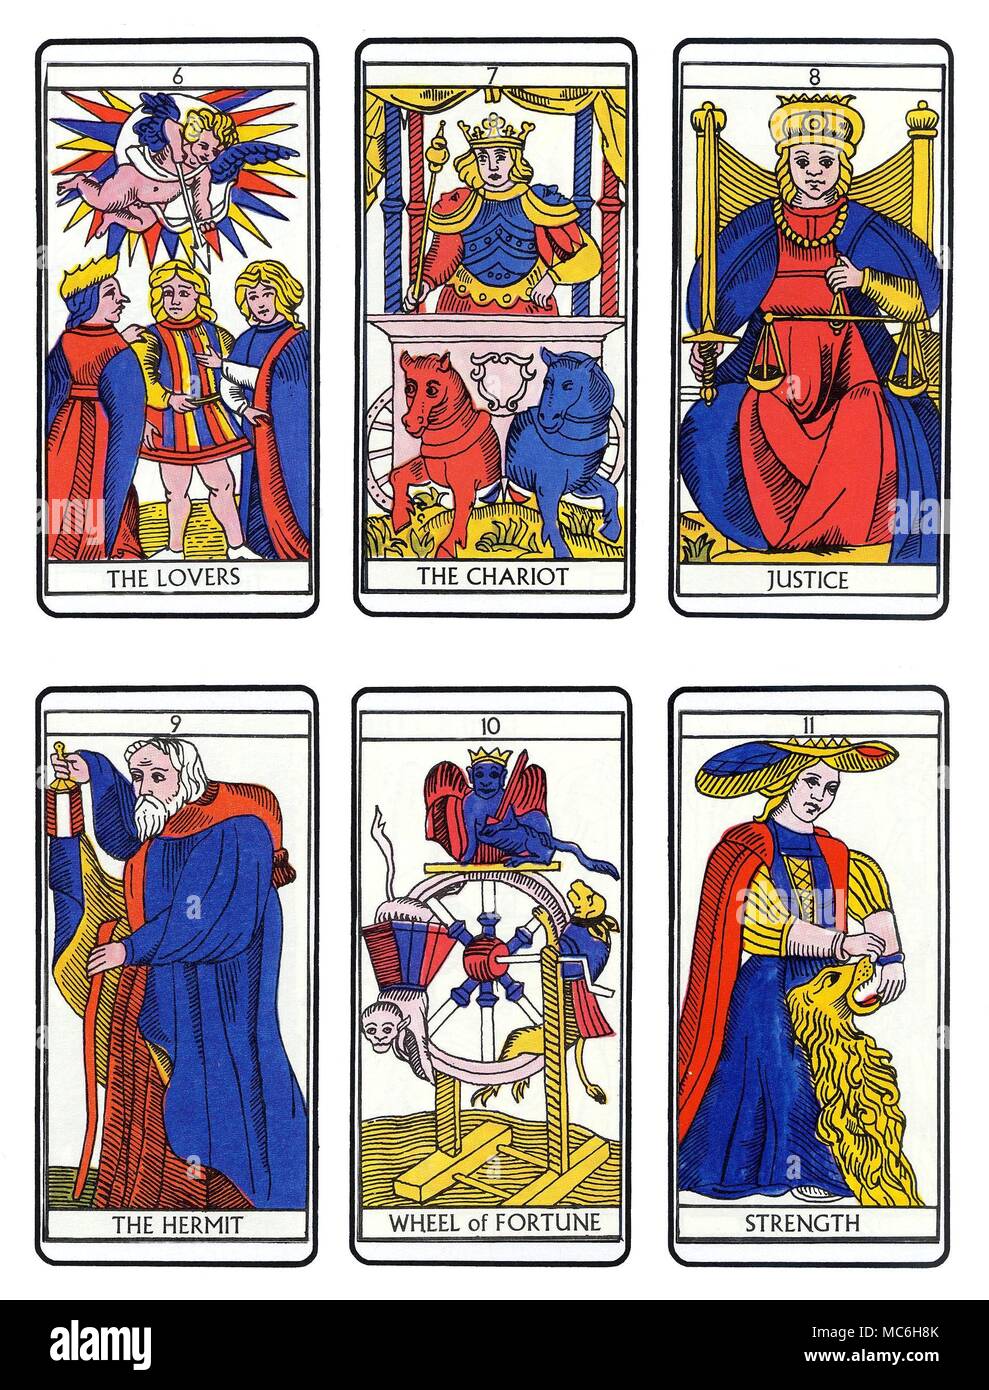 TAROT CARDS - MODERN MARSEILLES DECK Six cards from a complete sequence of Tarot cards in the Marseilles tradition. Top, from left to right - The Lovers, The Chariot, Justice, The Hermit, Wheel of Fortune and Strength. Stock Photo